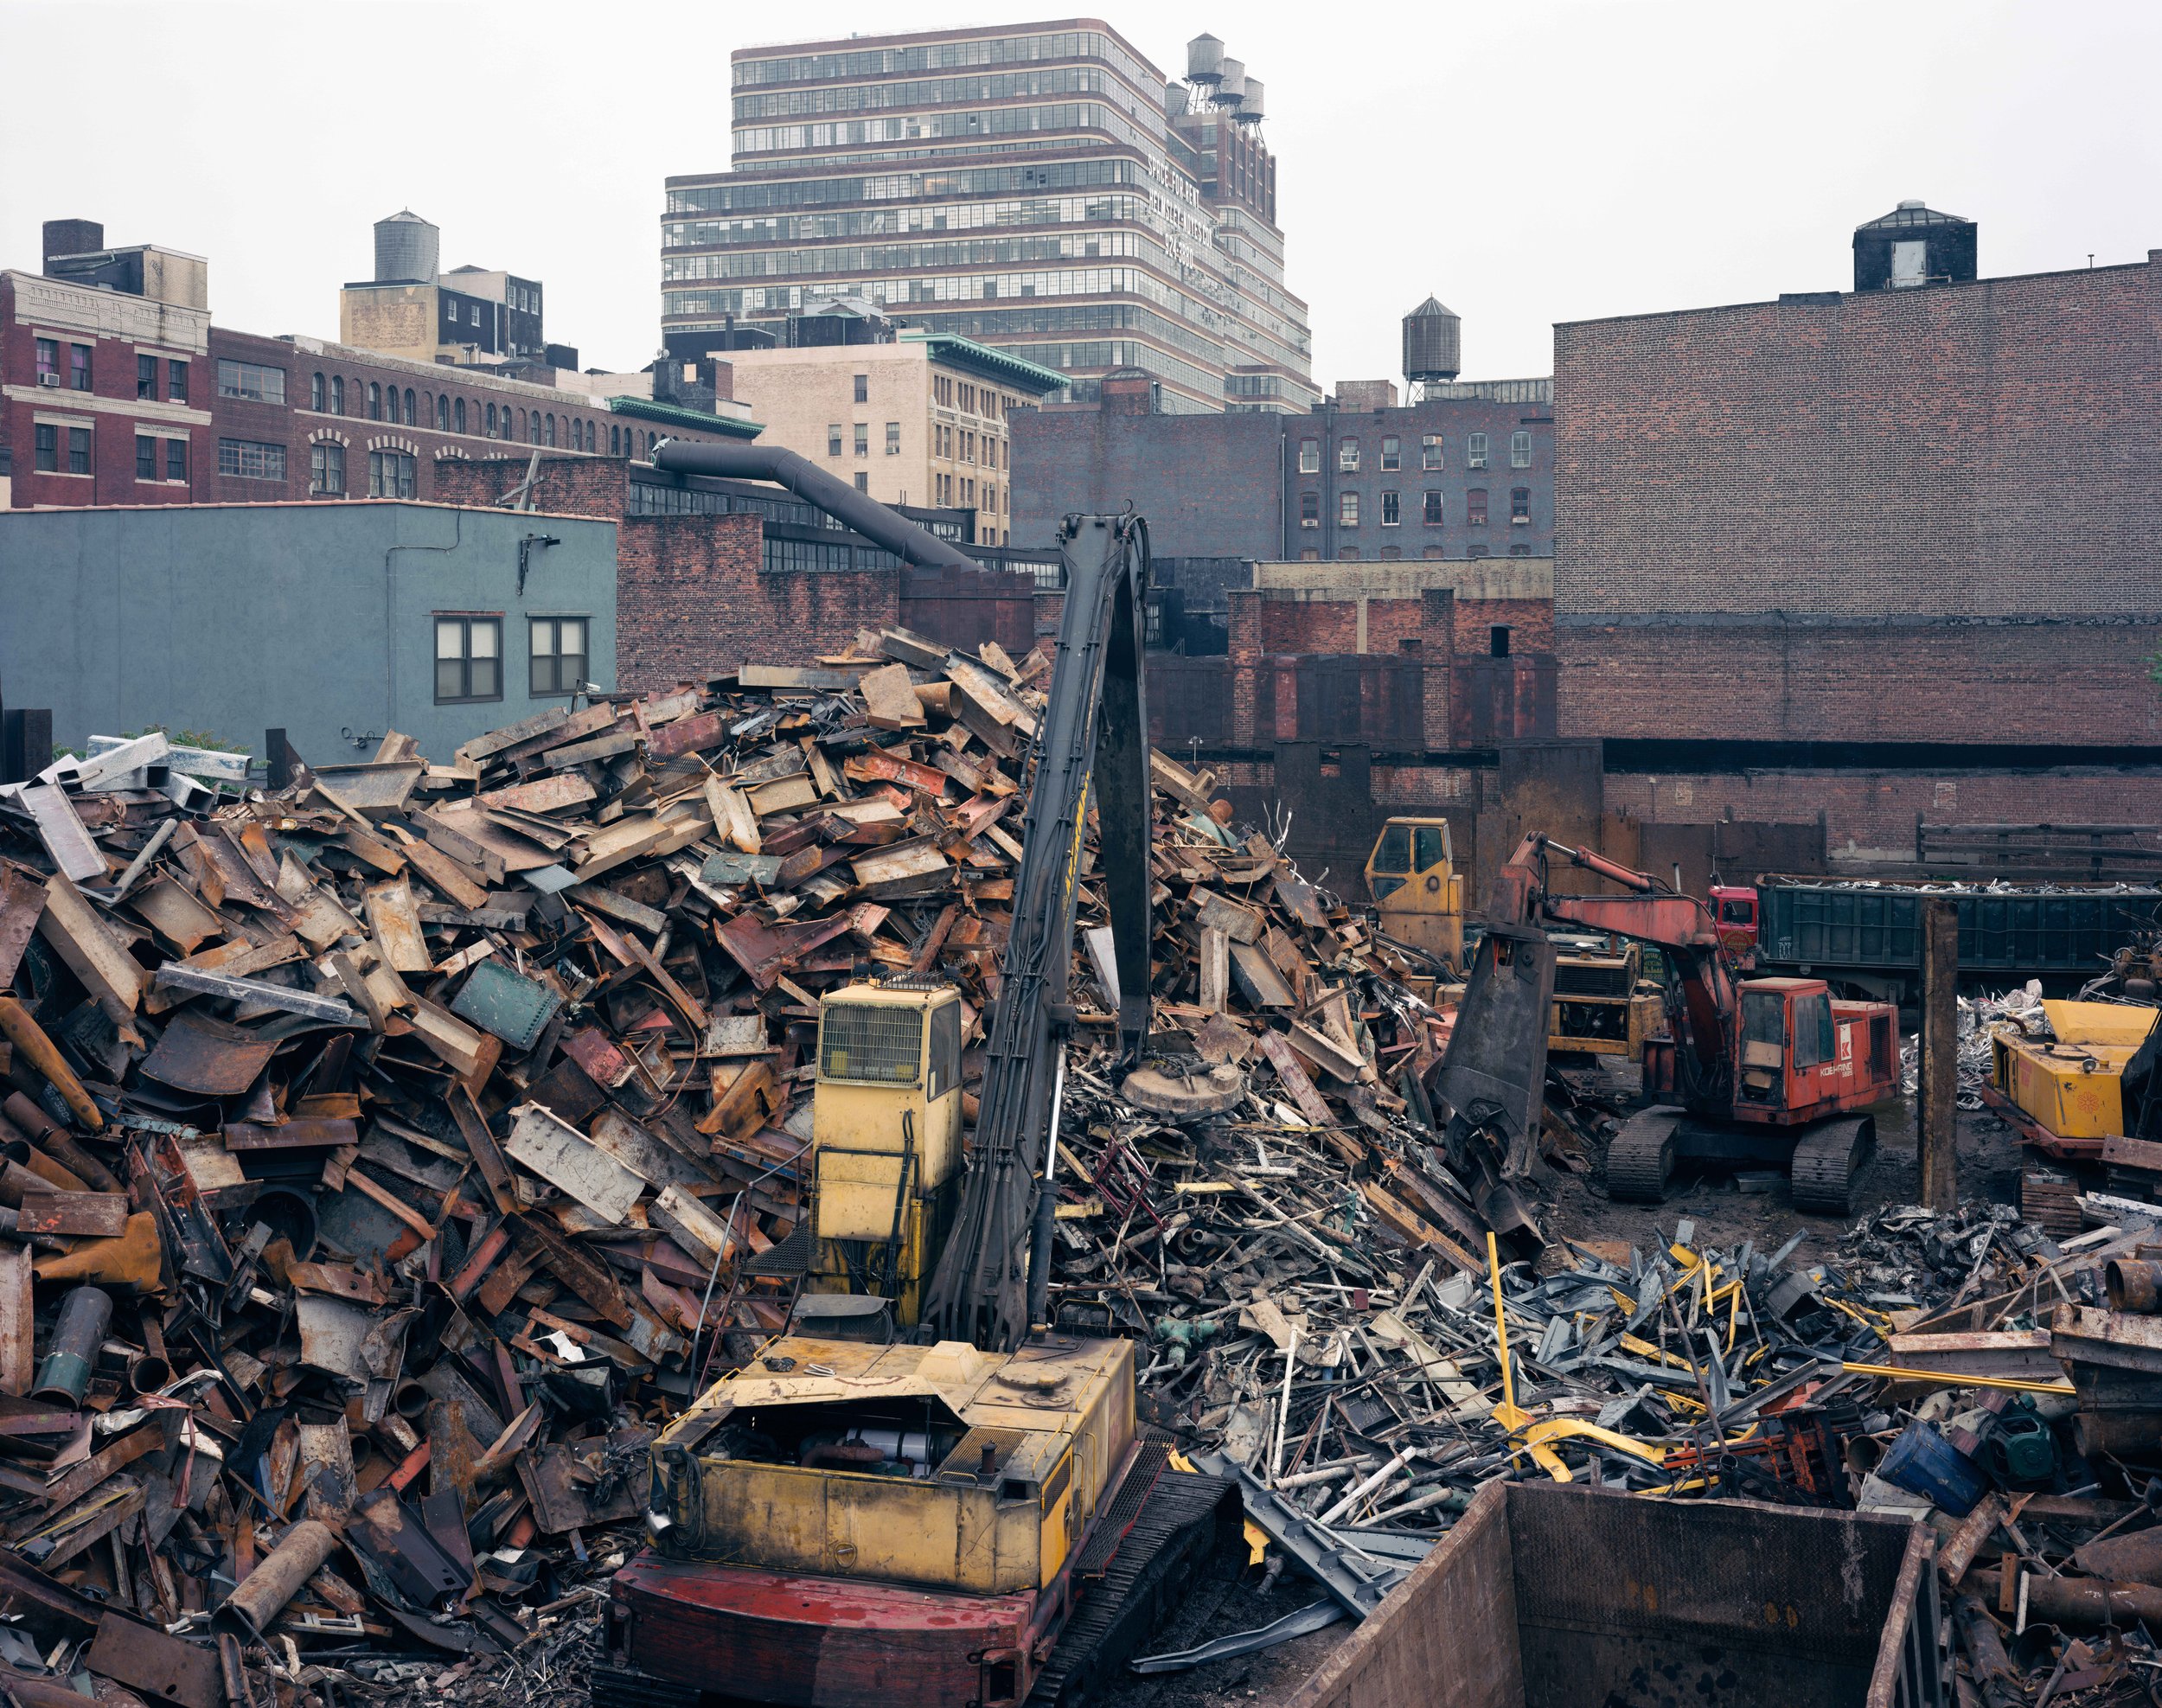 The Central Iron Metal Scrap Yard, 27th to 28th Street, March, 2001